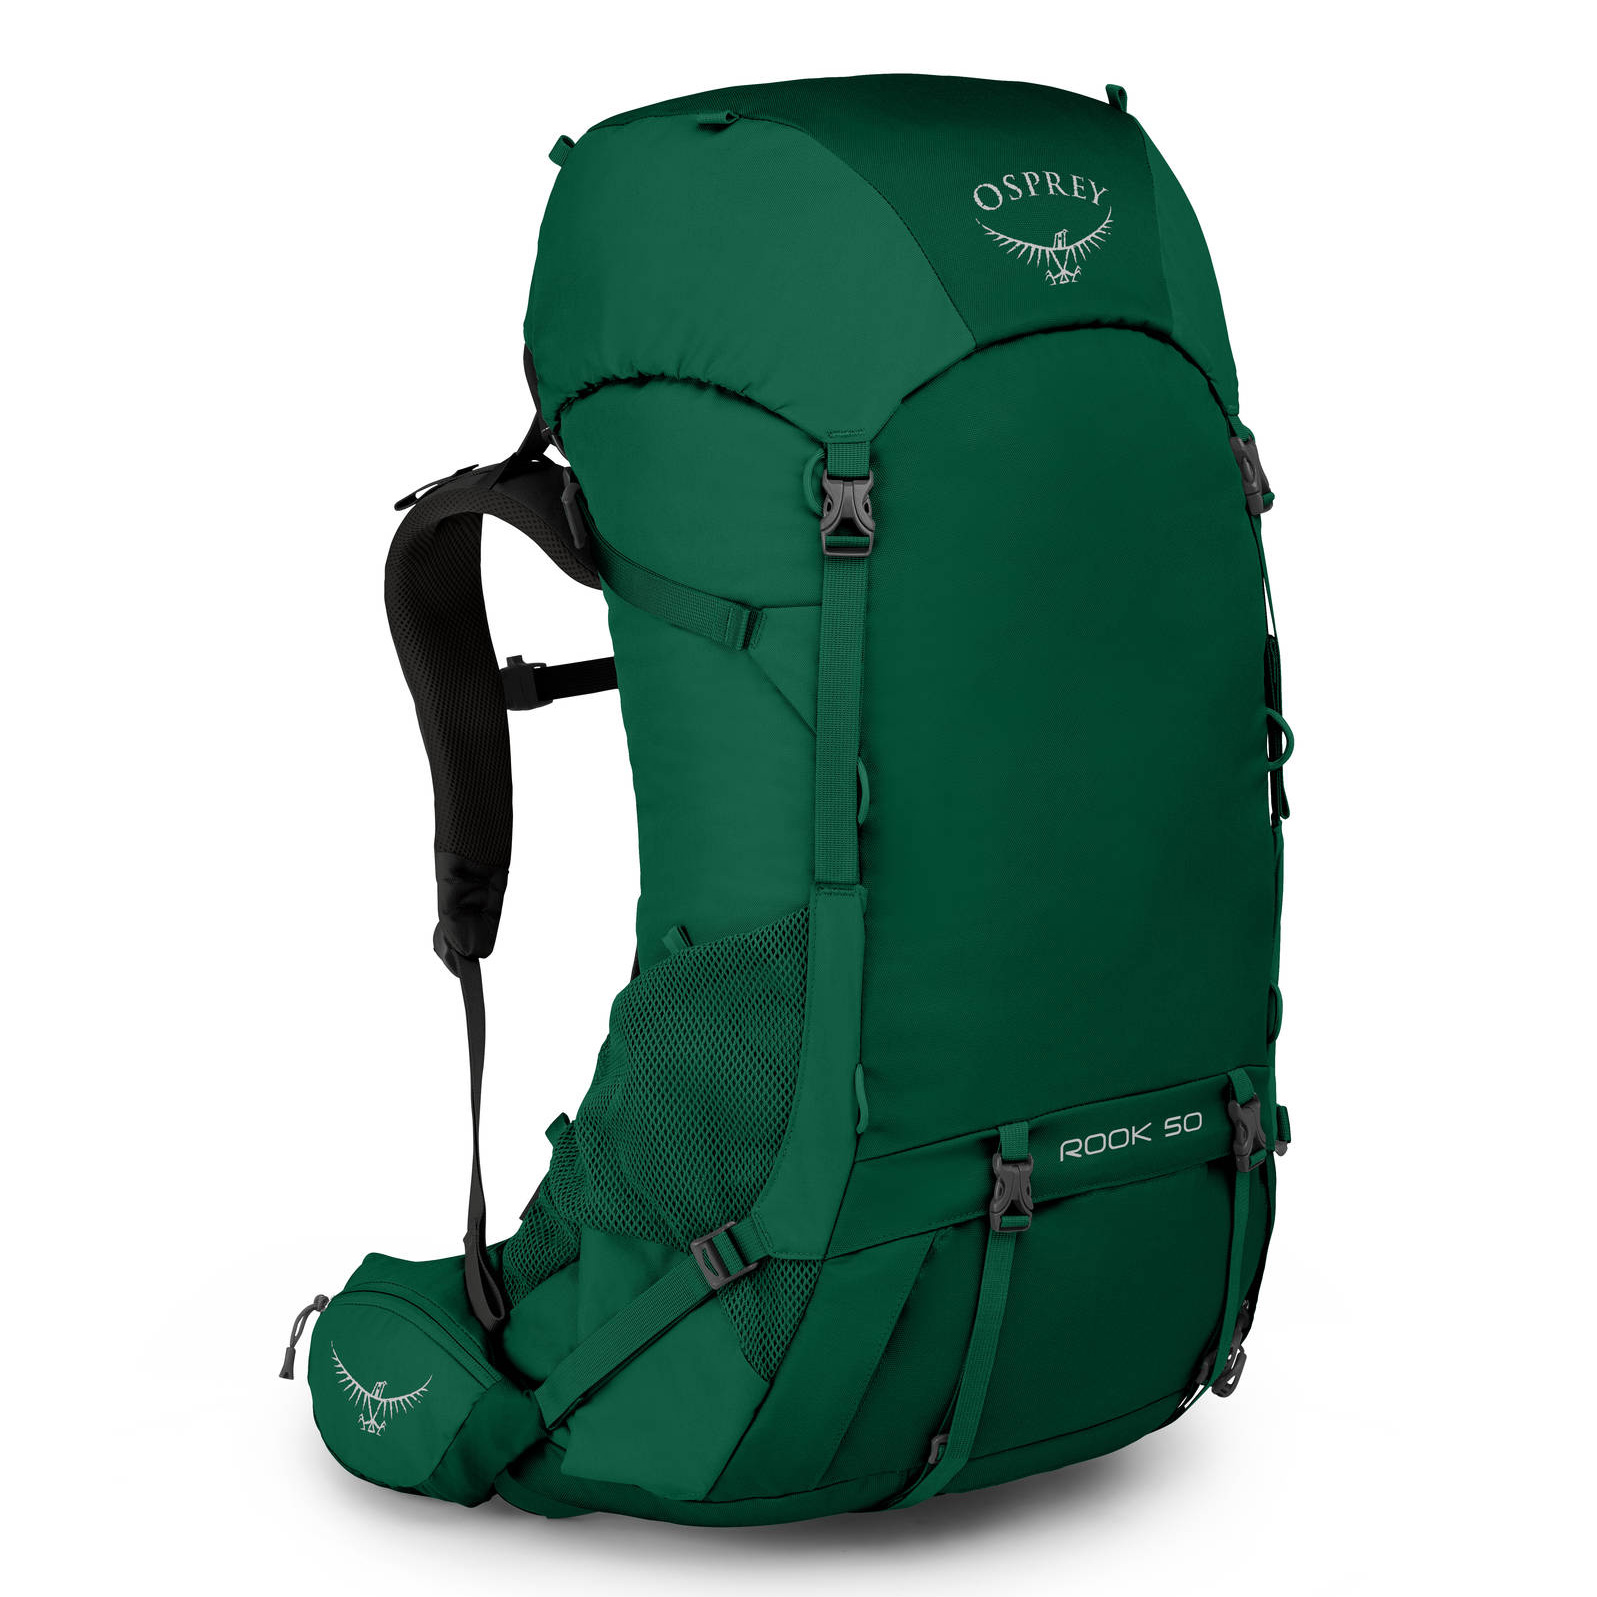 Picture of Osprey Rook 50 Backpack - Mallard Green